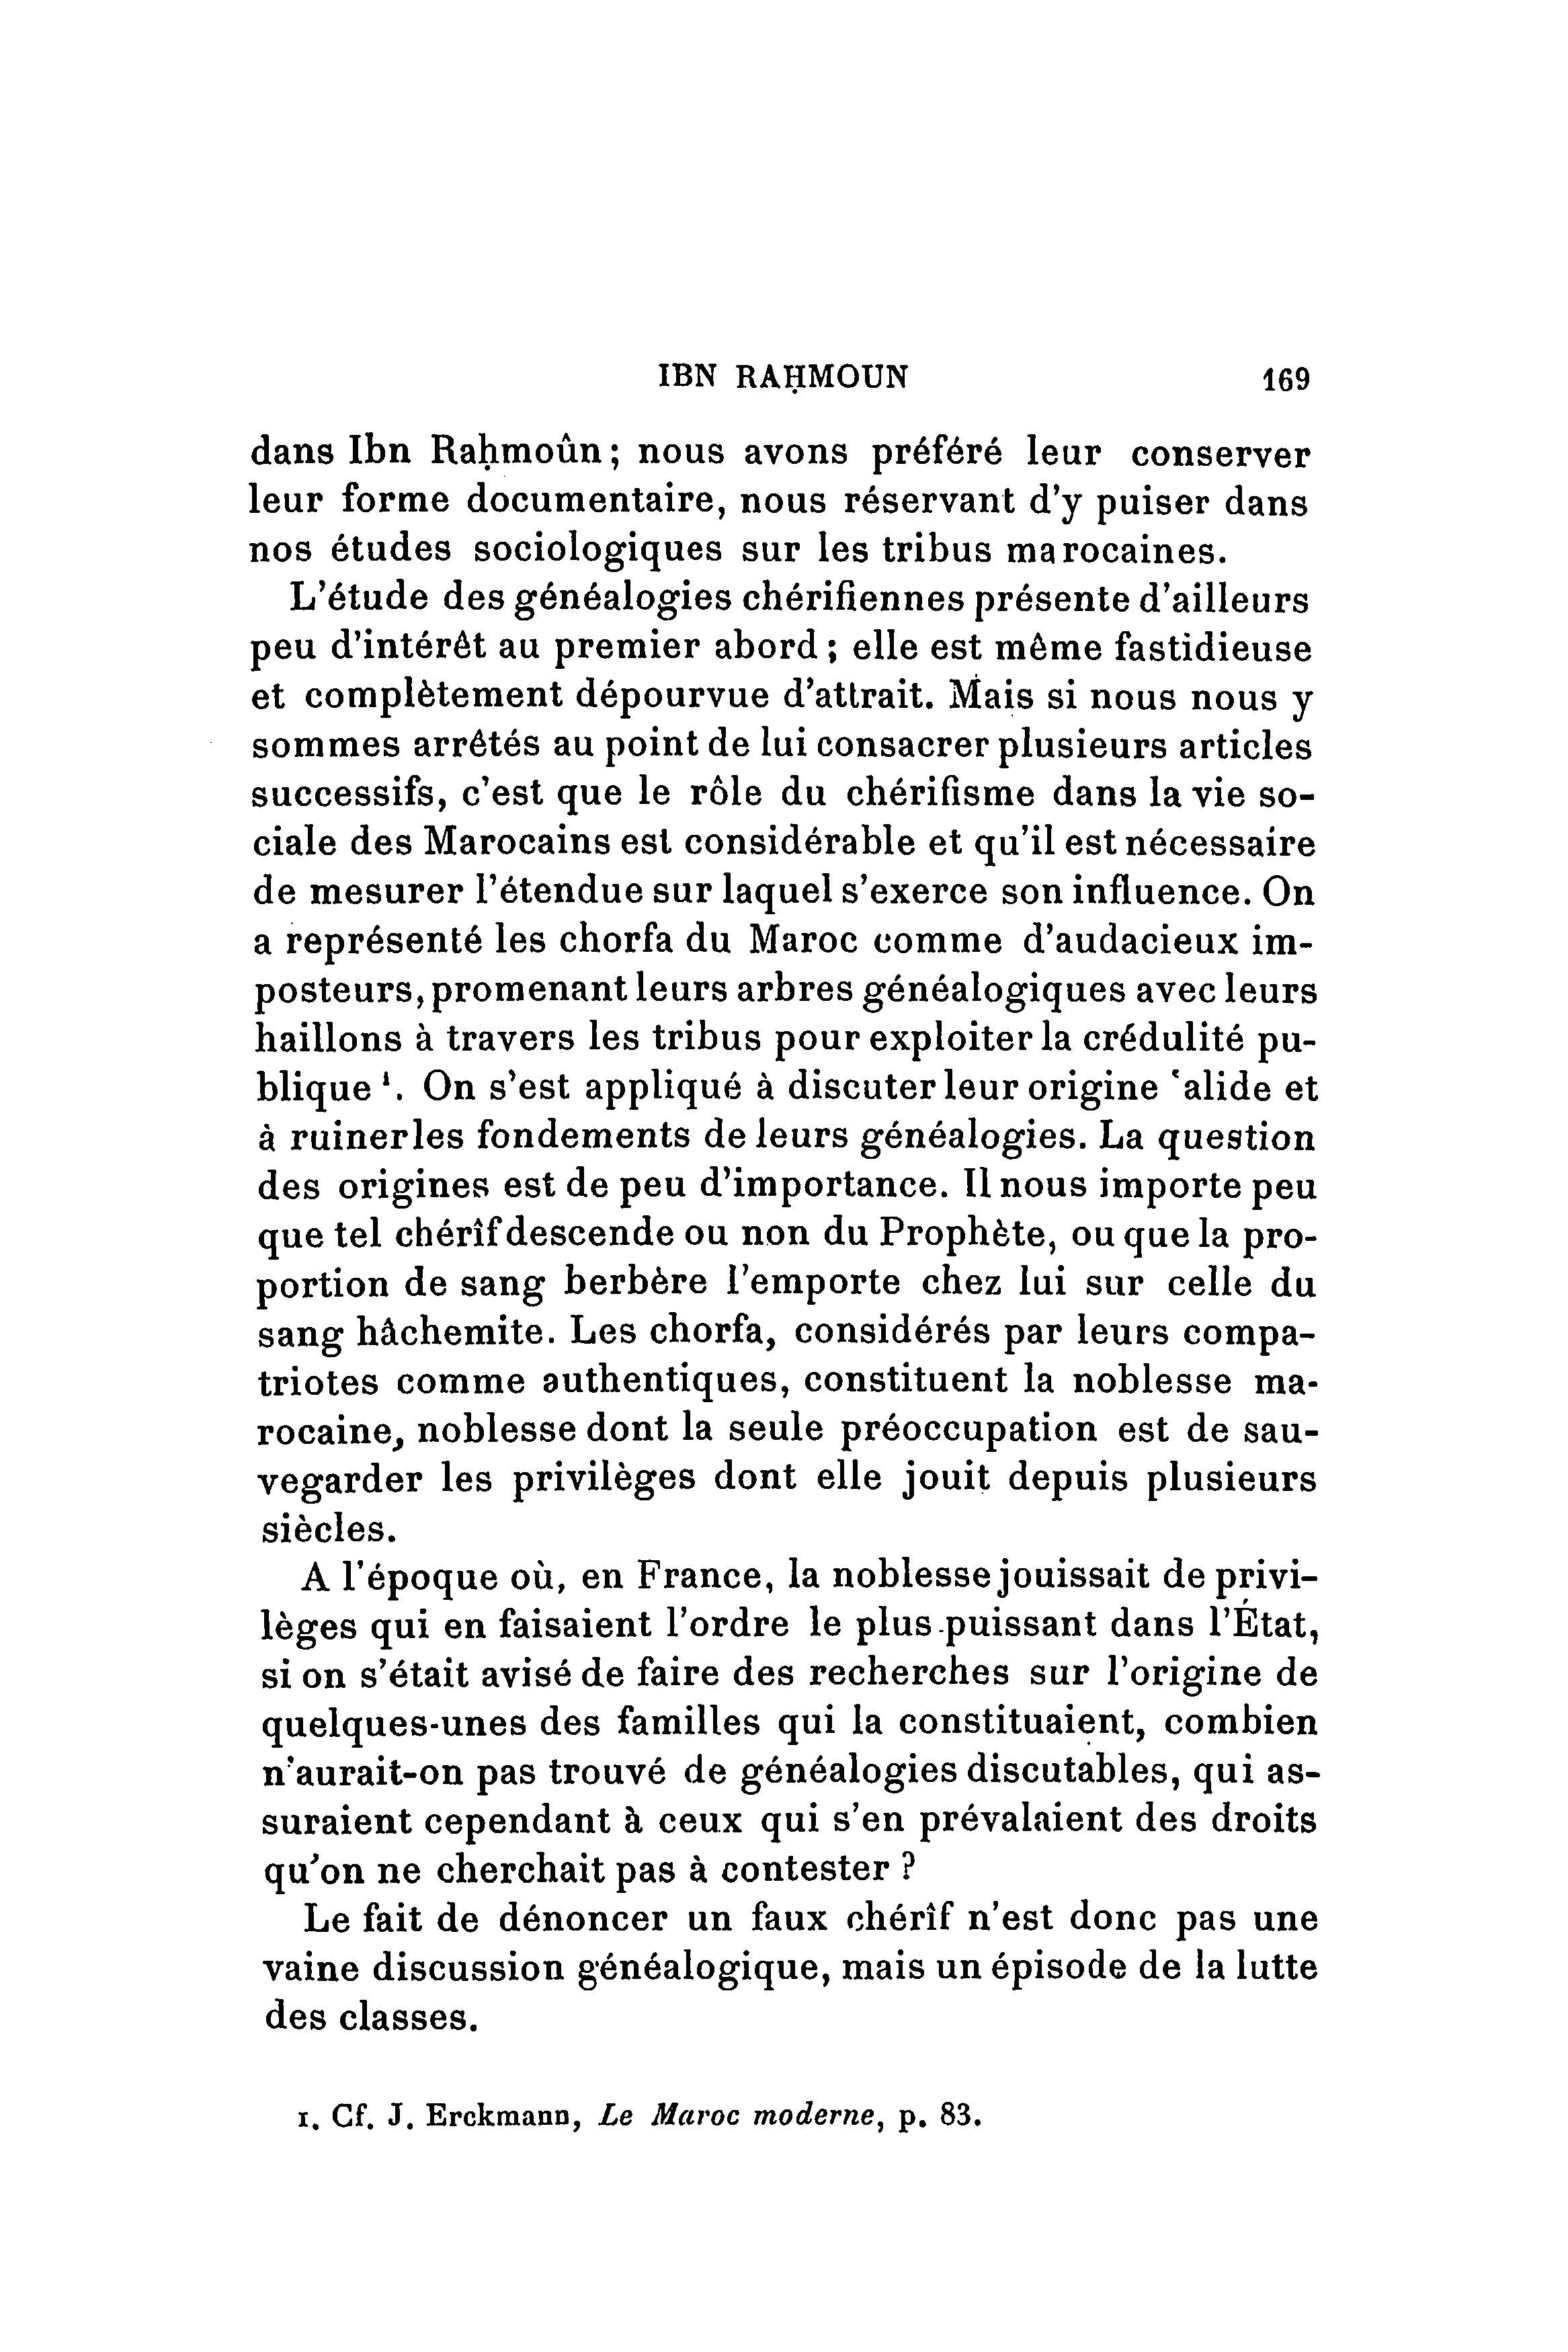 archives-marocaines-volume-03-1905_page_176